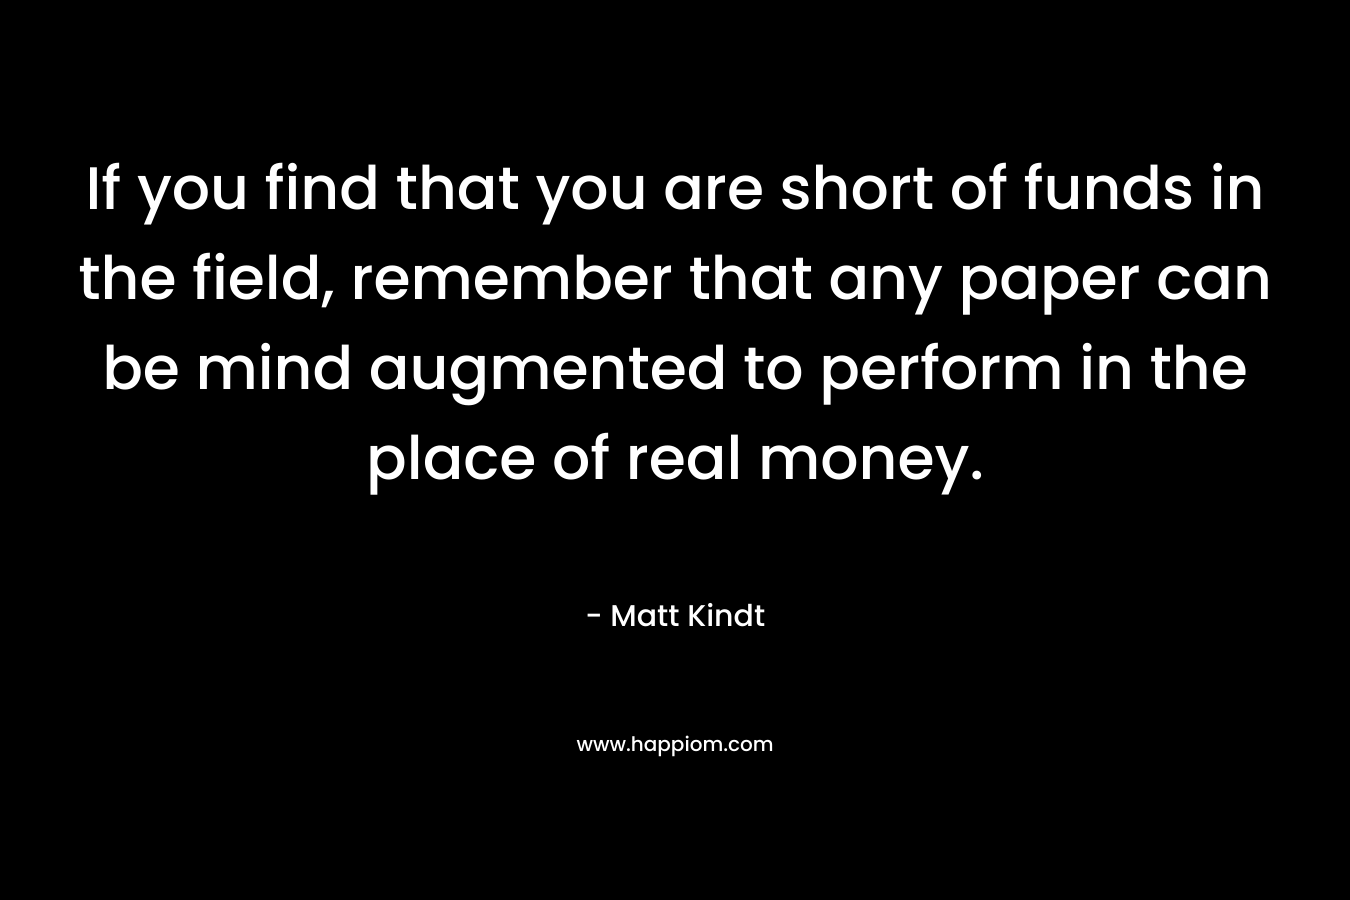 If you find that you are short of funds in the field, remember that any paper can be mind augmented to perform in the place of real money.